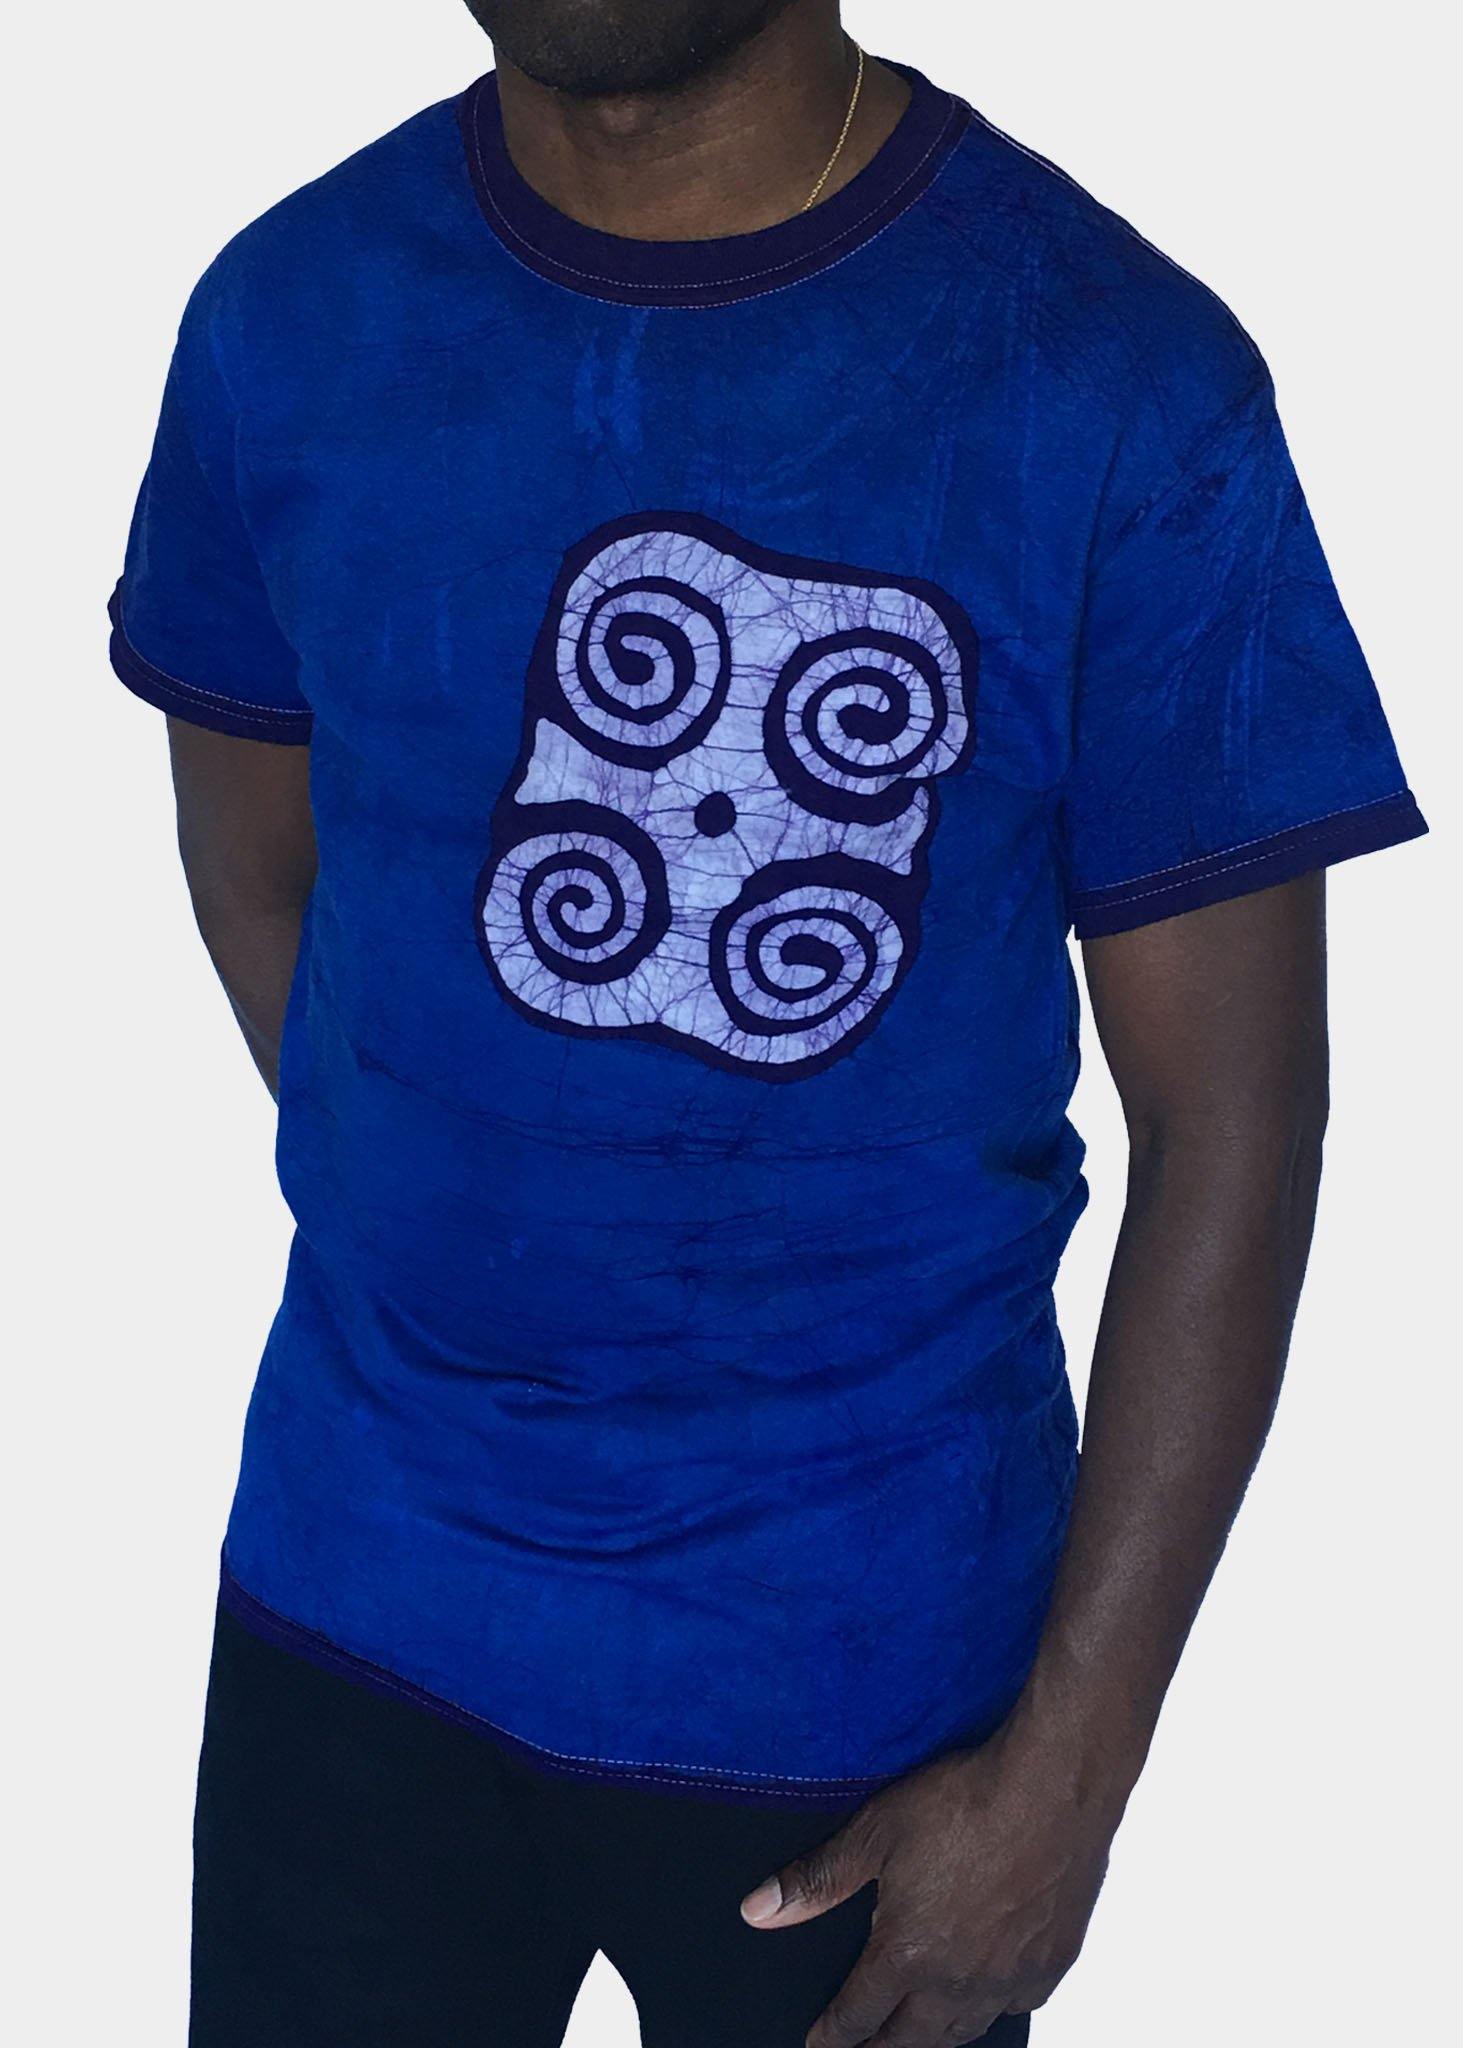 Blue and White Short Sleeve Batik T-Shirt with Ram's Horns Symbol -Contemporary and Colorful Ensemble-African apparel and accessories